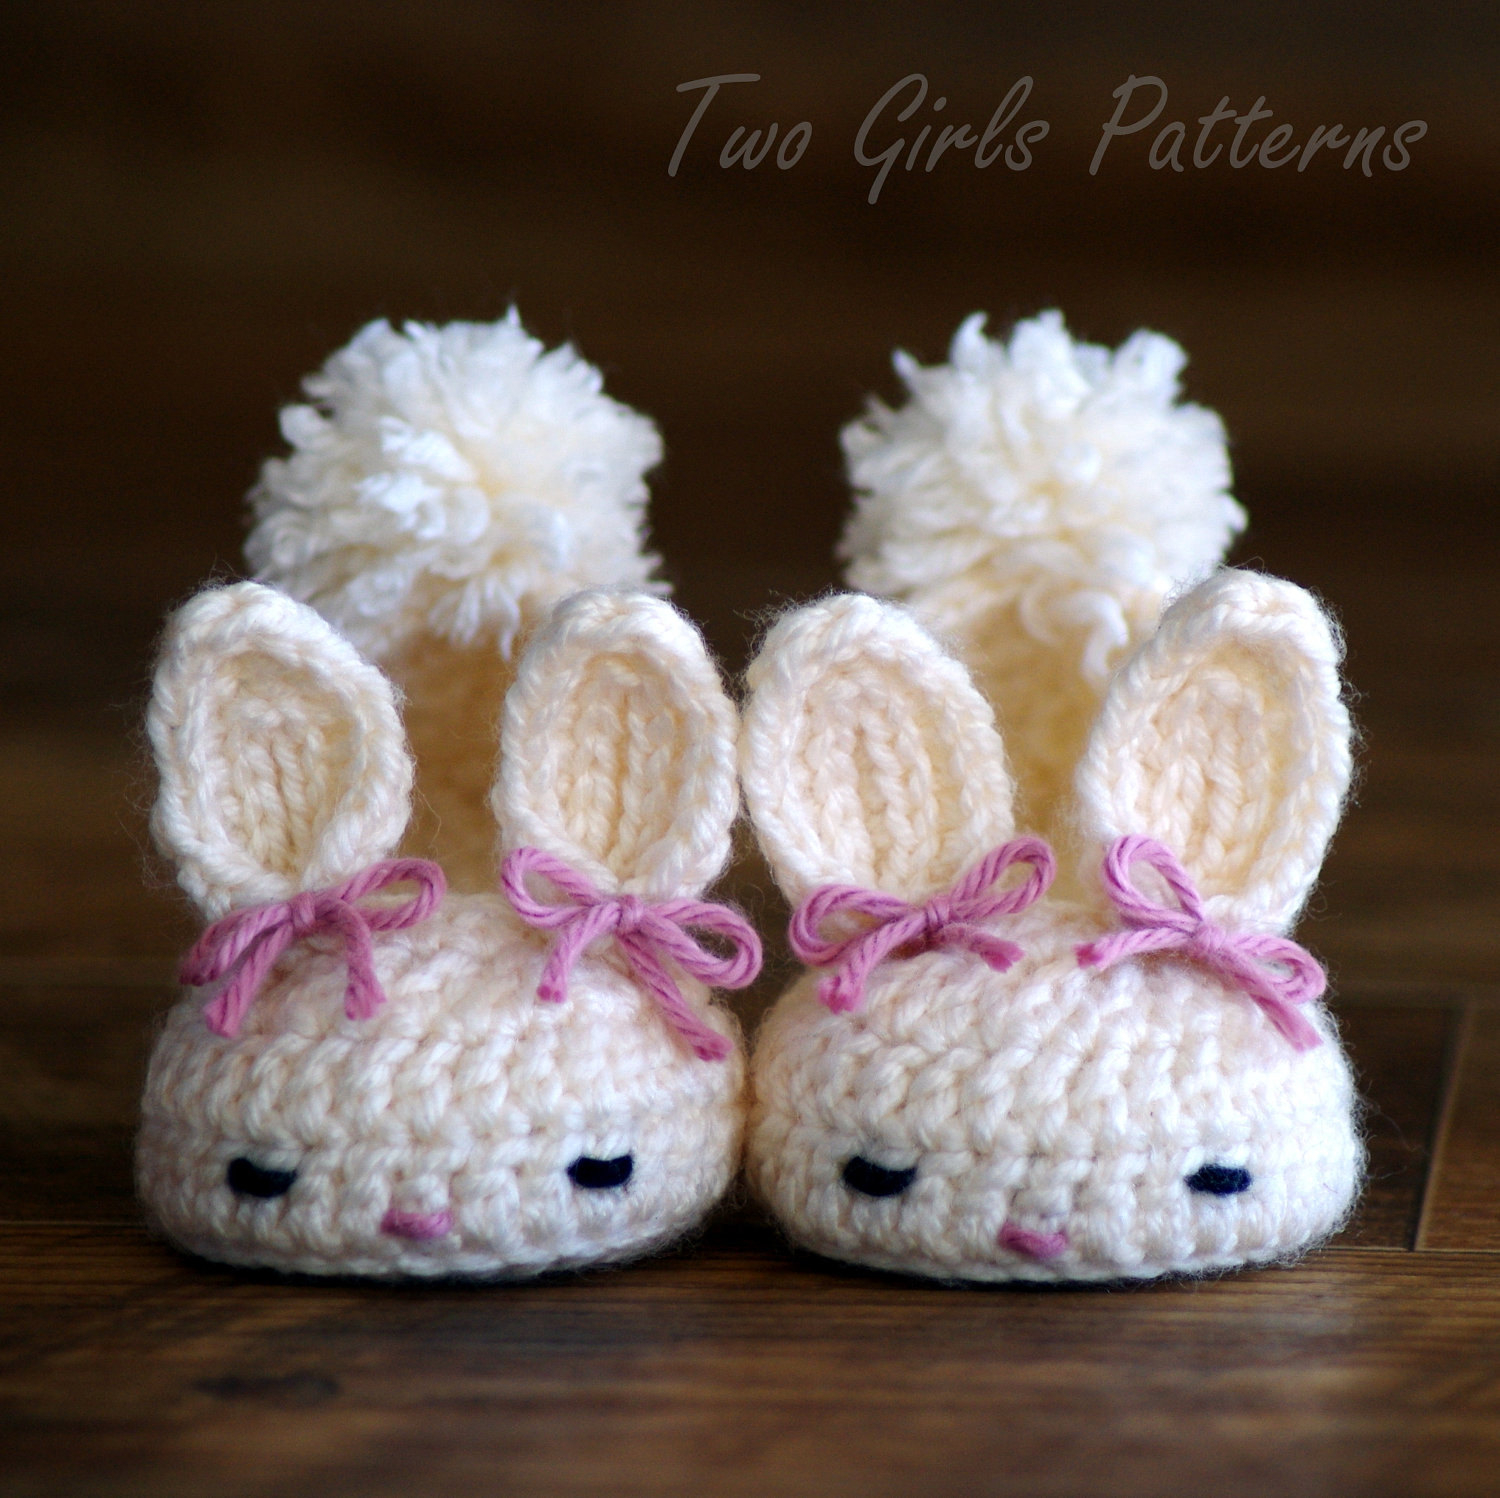 Crochet Slipper Patterns For Toddlers Crochet Patterns Ba Booties Classic Year Round Bunny House Etsy